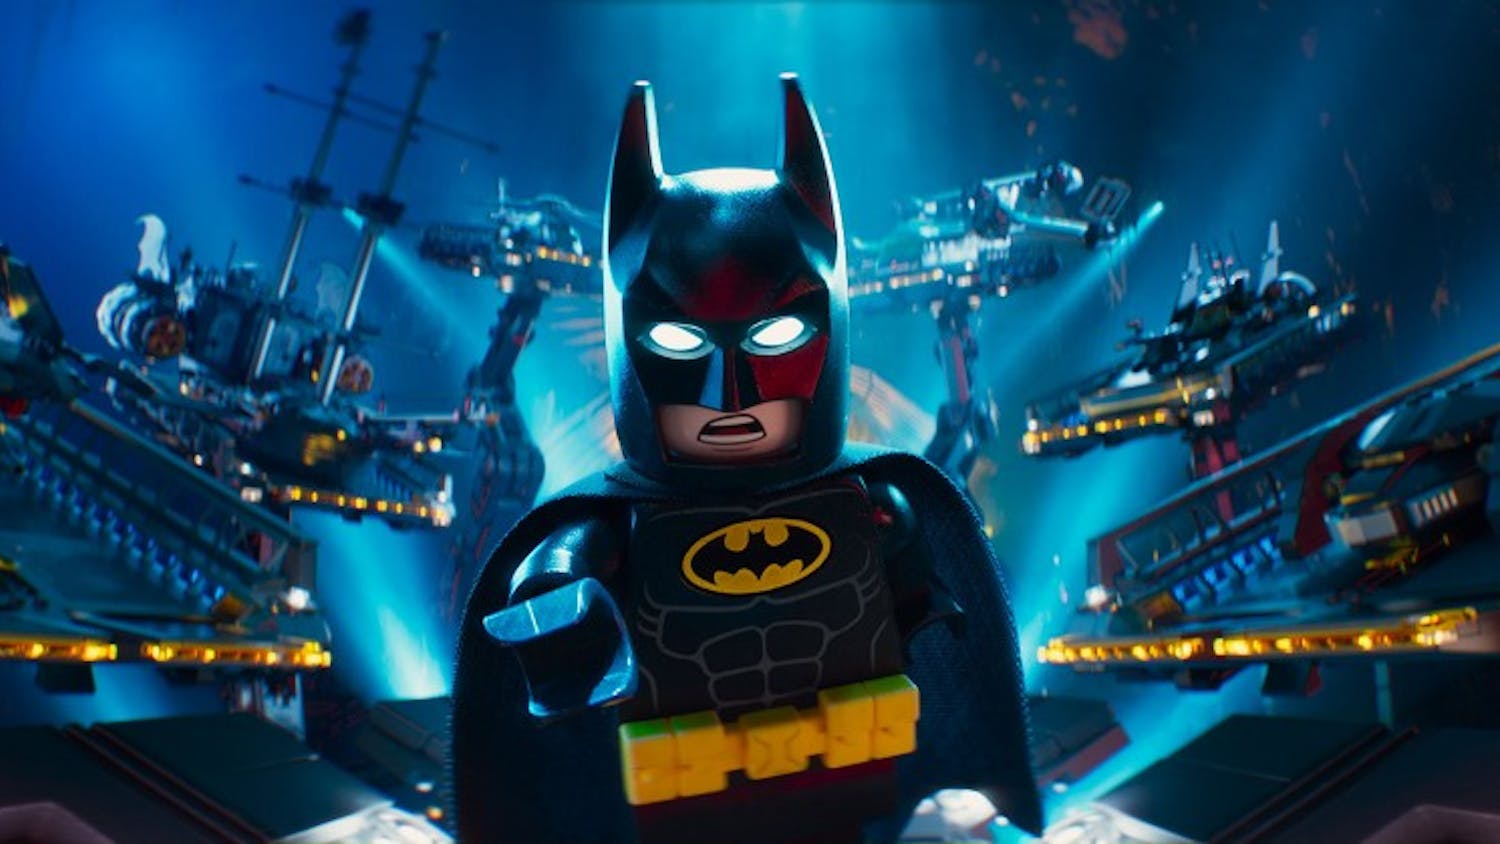 Batman voiced by Will Arnett in a scene from the animated movie "The LEGO Batman Movie" directed by Chris McKay. (Warner Bros. Pictures/TNS)